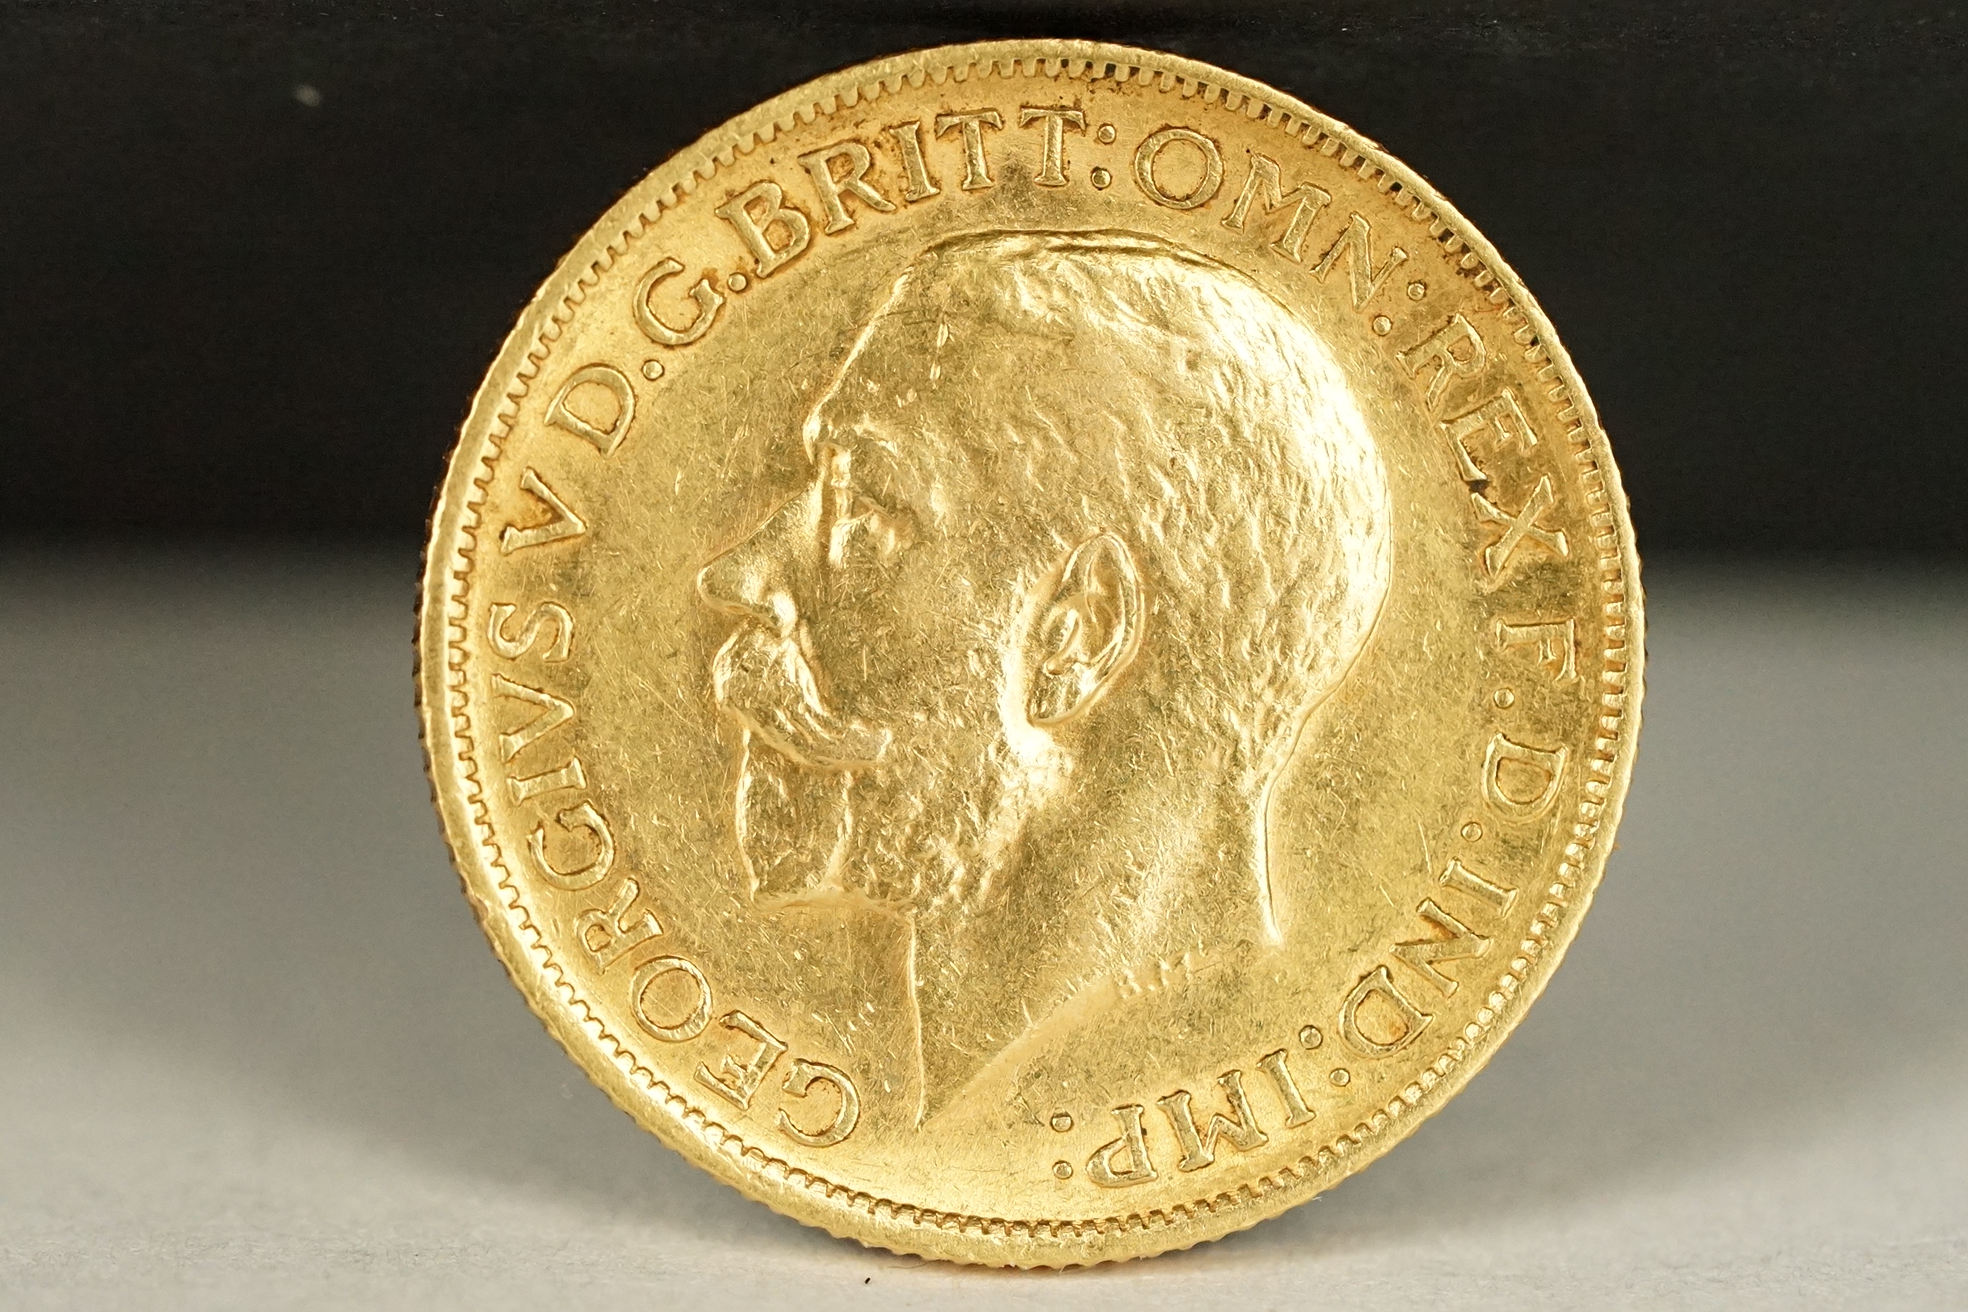 A King George V 1911 gold full sovereign coin with Sydney Mint mark. - Image 2 of 3